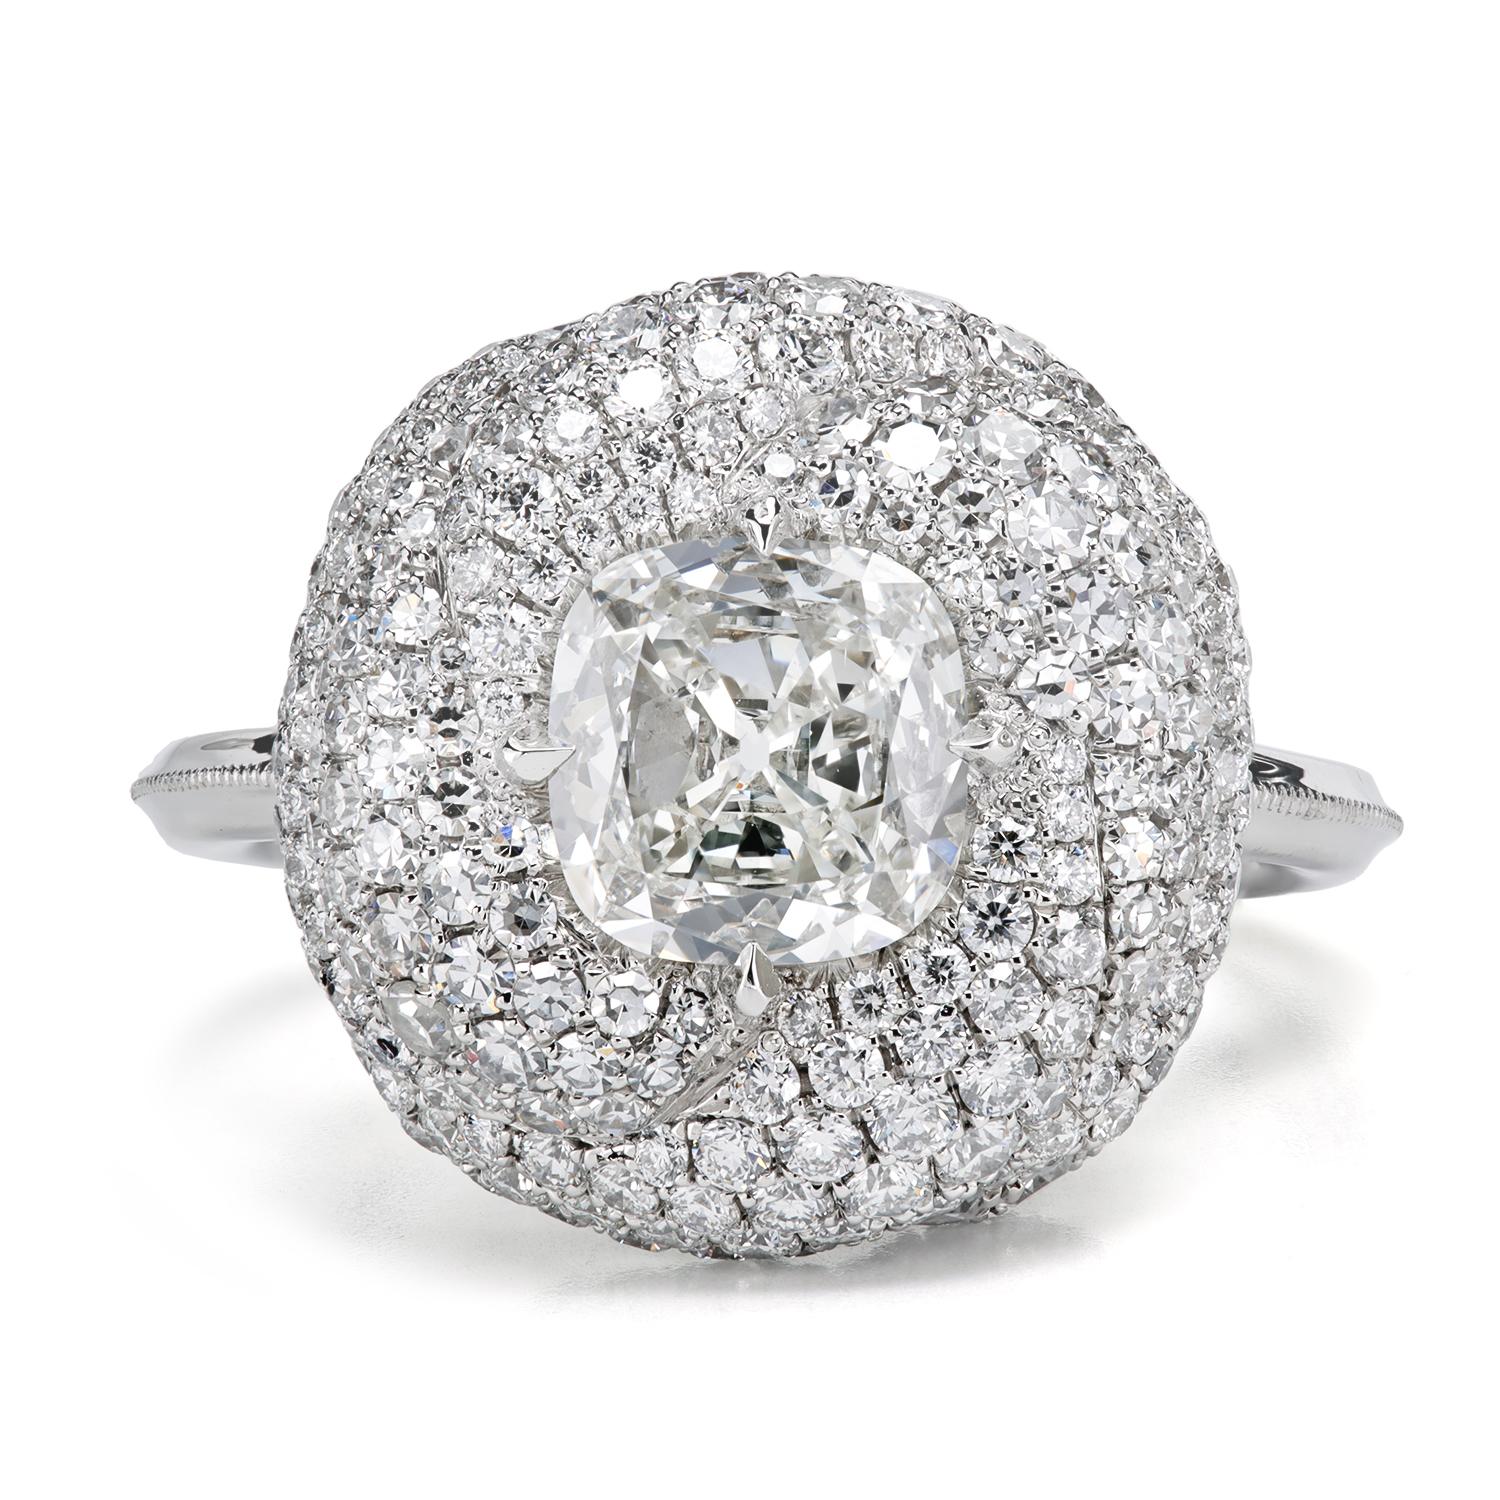 Sleek and stylish diamond ring embodies the strength and resilience of true love. The beautiful pave-set folds enclosing the center stone 
are lined with single and full-cut diamonds with a breathtaking results.

0.92 ct F/VS1 True Antique™ Cushion